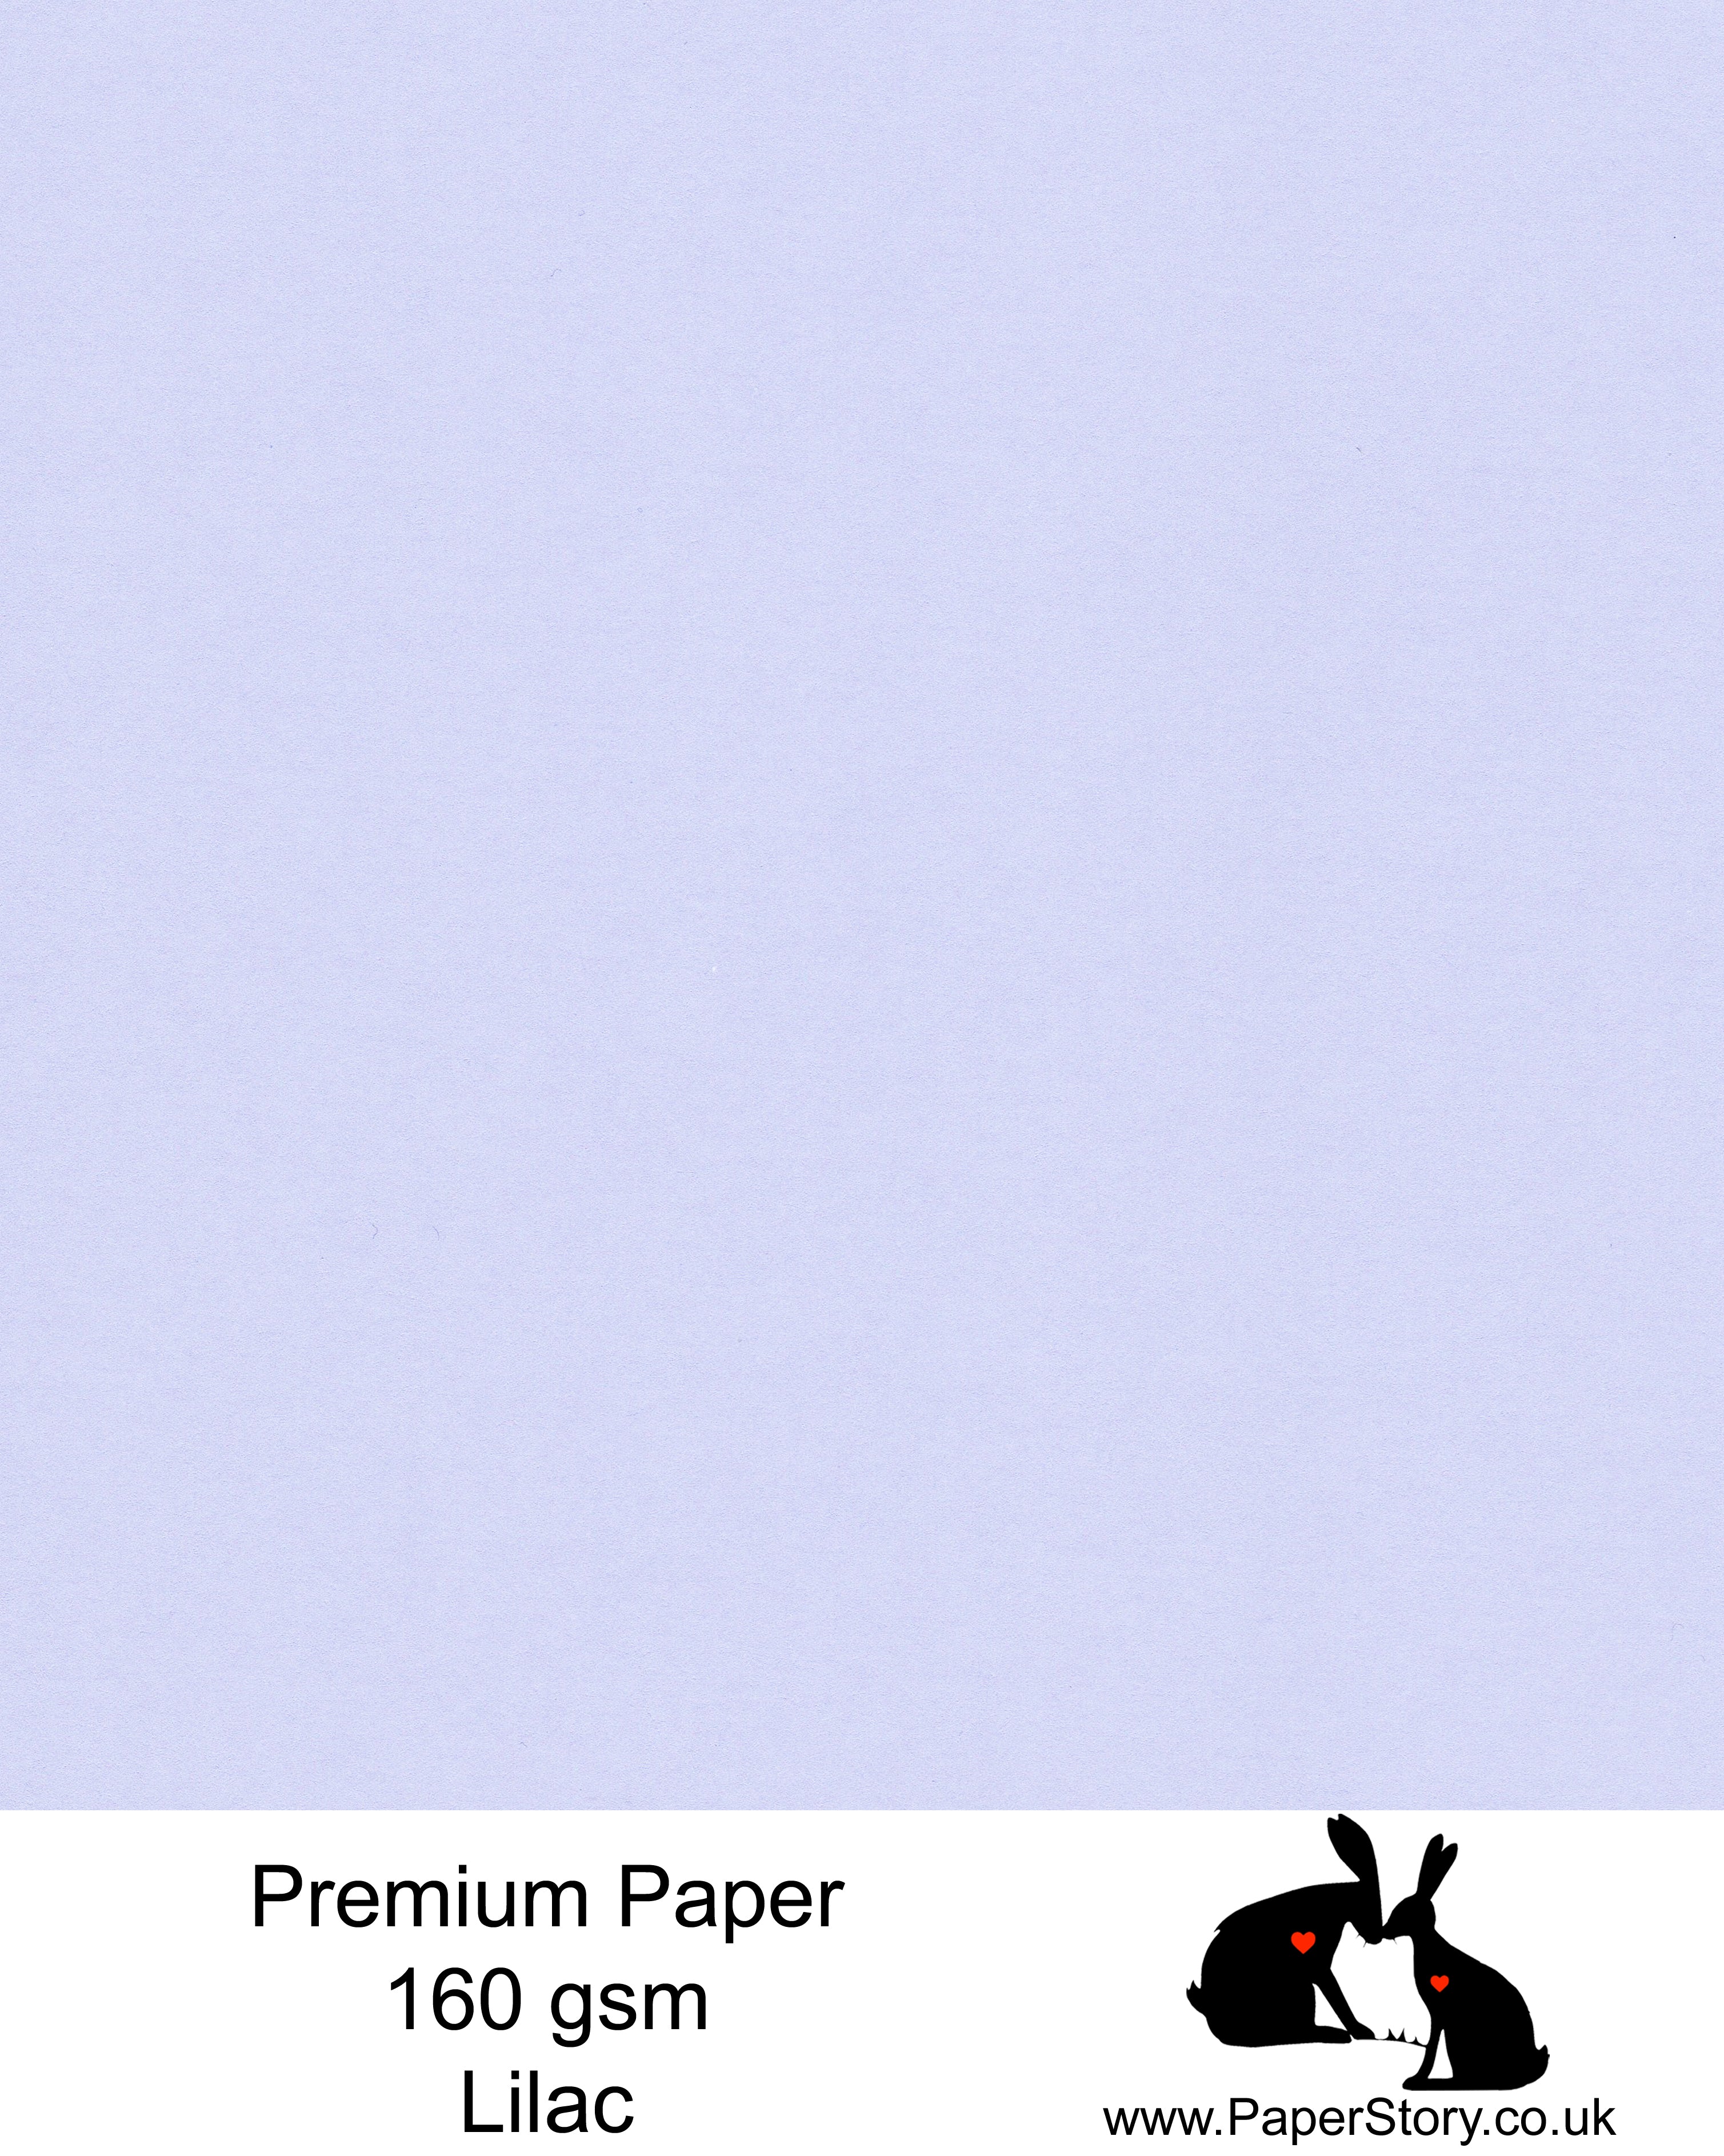 Lilac Matt paper 160 gsm, the same colour on both sides, a soft purple lilac with a smooth finish. Perfect for crafting, and card making